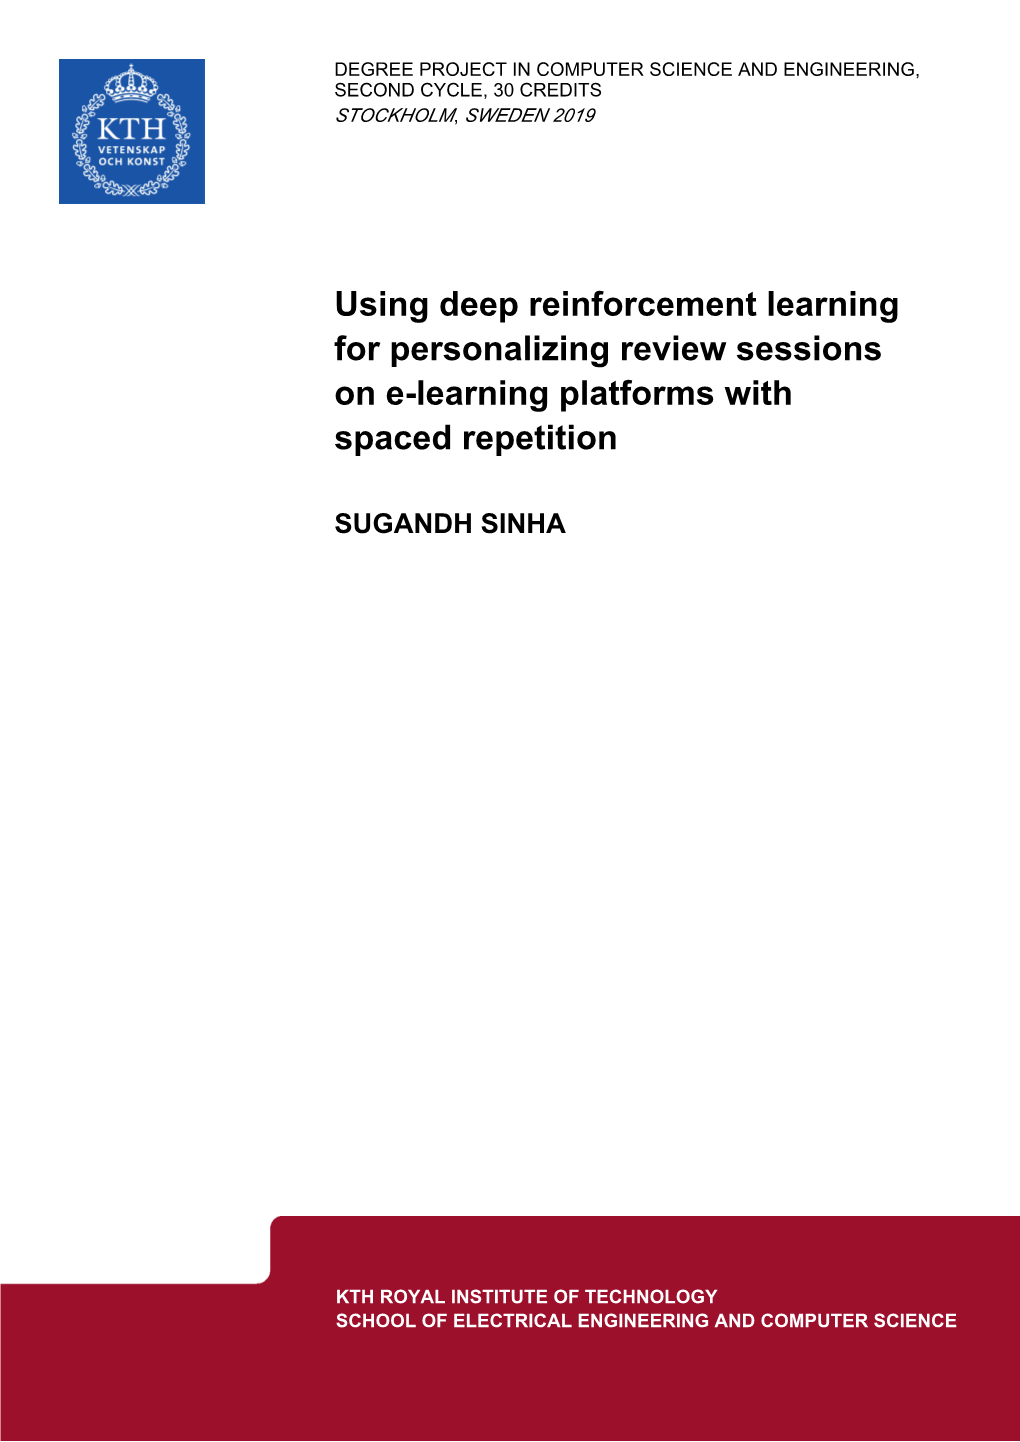 Using Deep Reinforcement Learning for Personalizing Review Sessions on E-Learning Platforms with Spaced Repetition